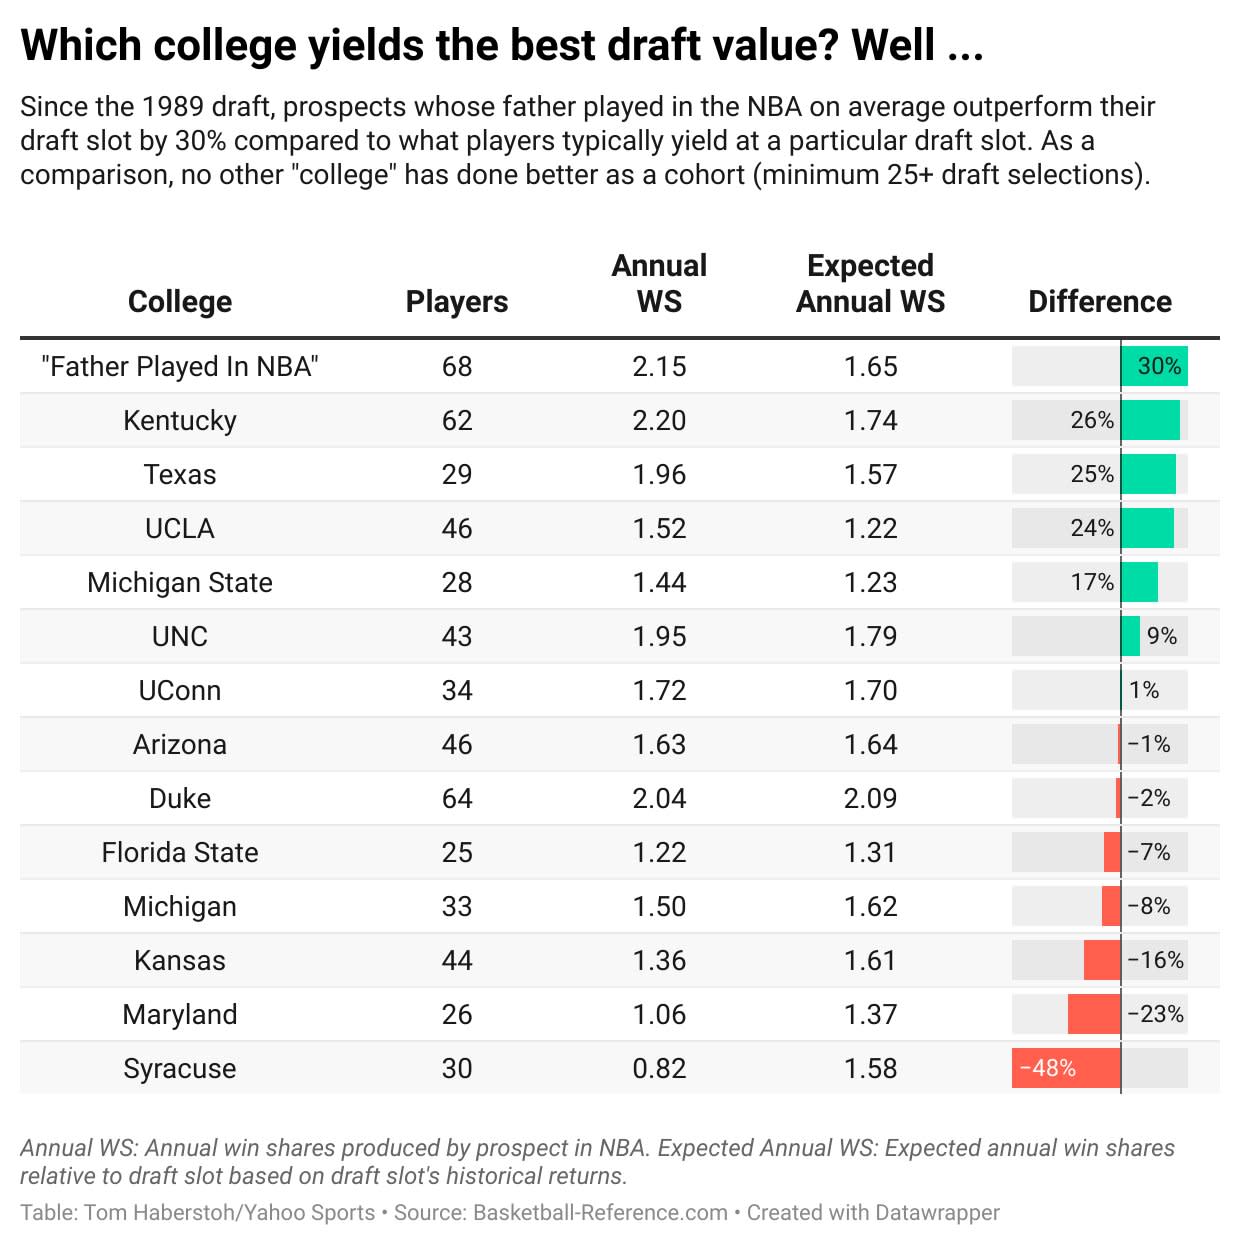 (Tom Haberstroh/Yahoo Sports; table created using Datawrapper)